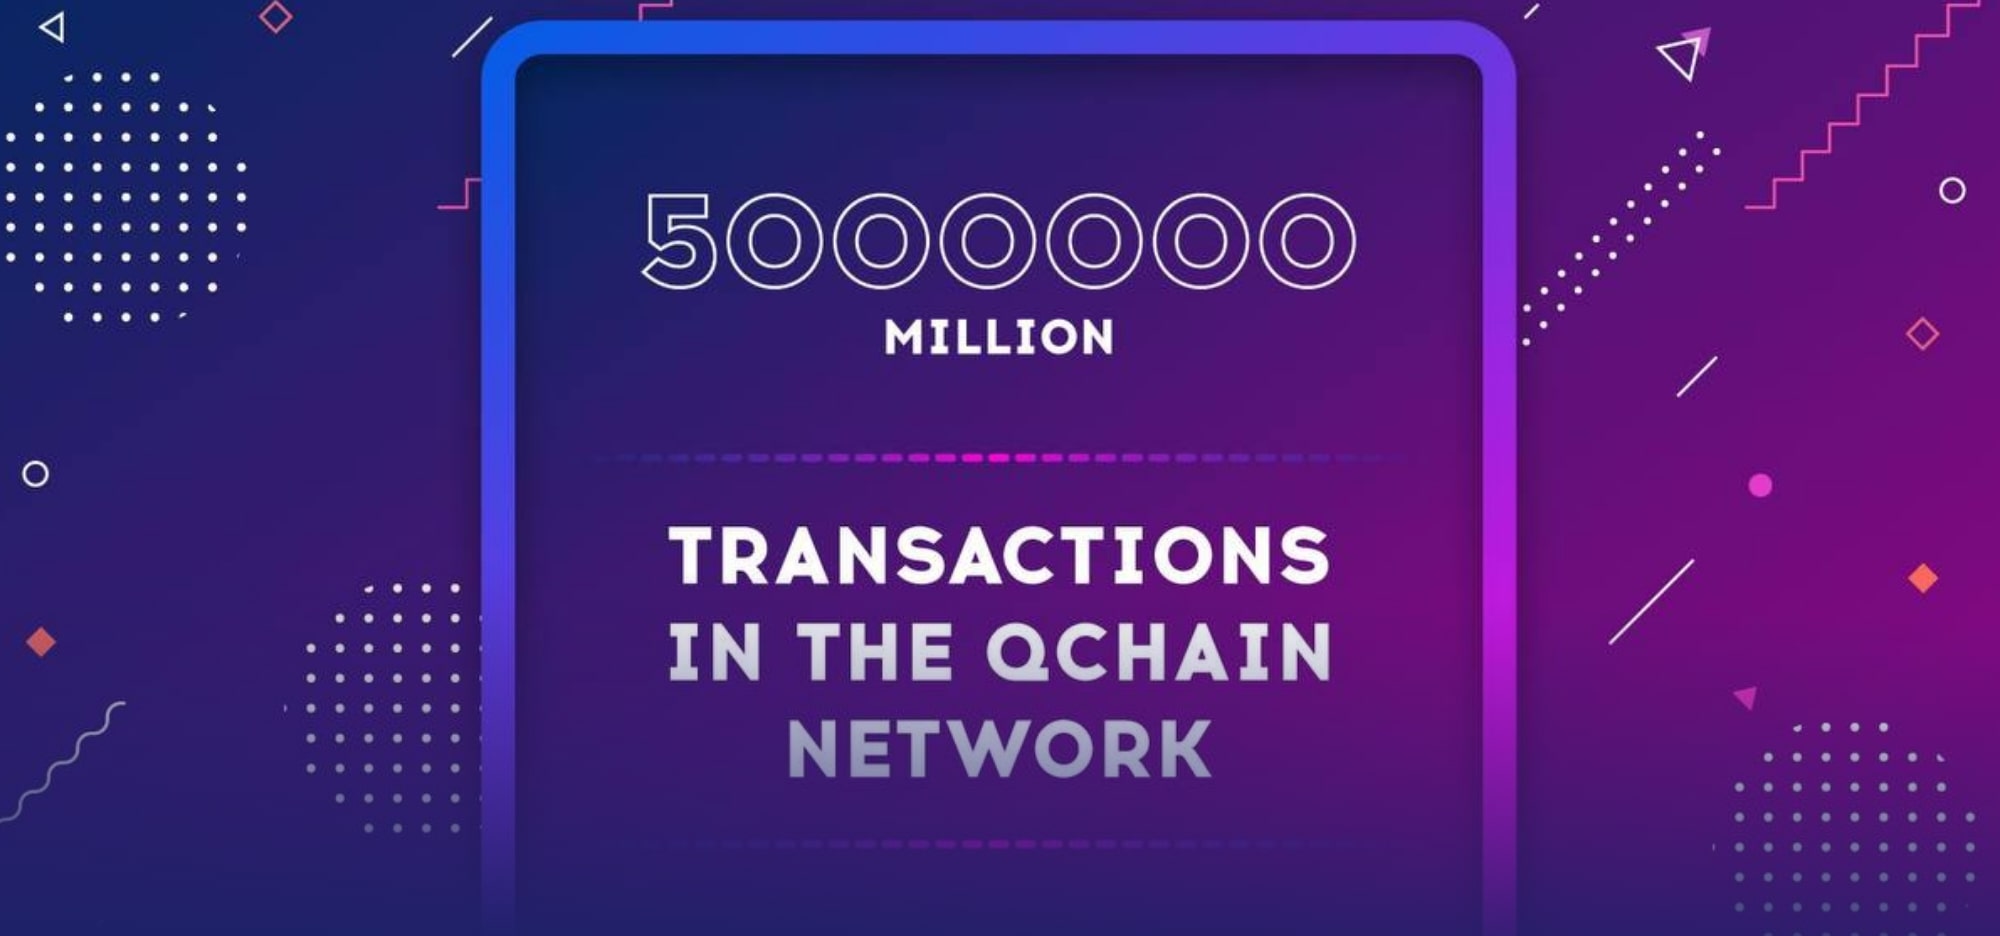 5 million transactions in the Qchain network